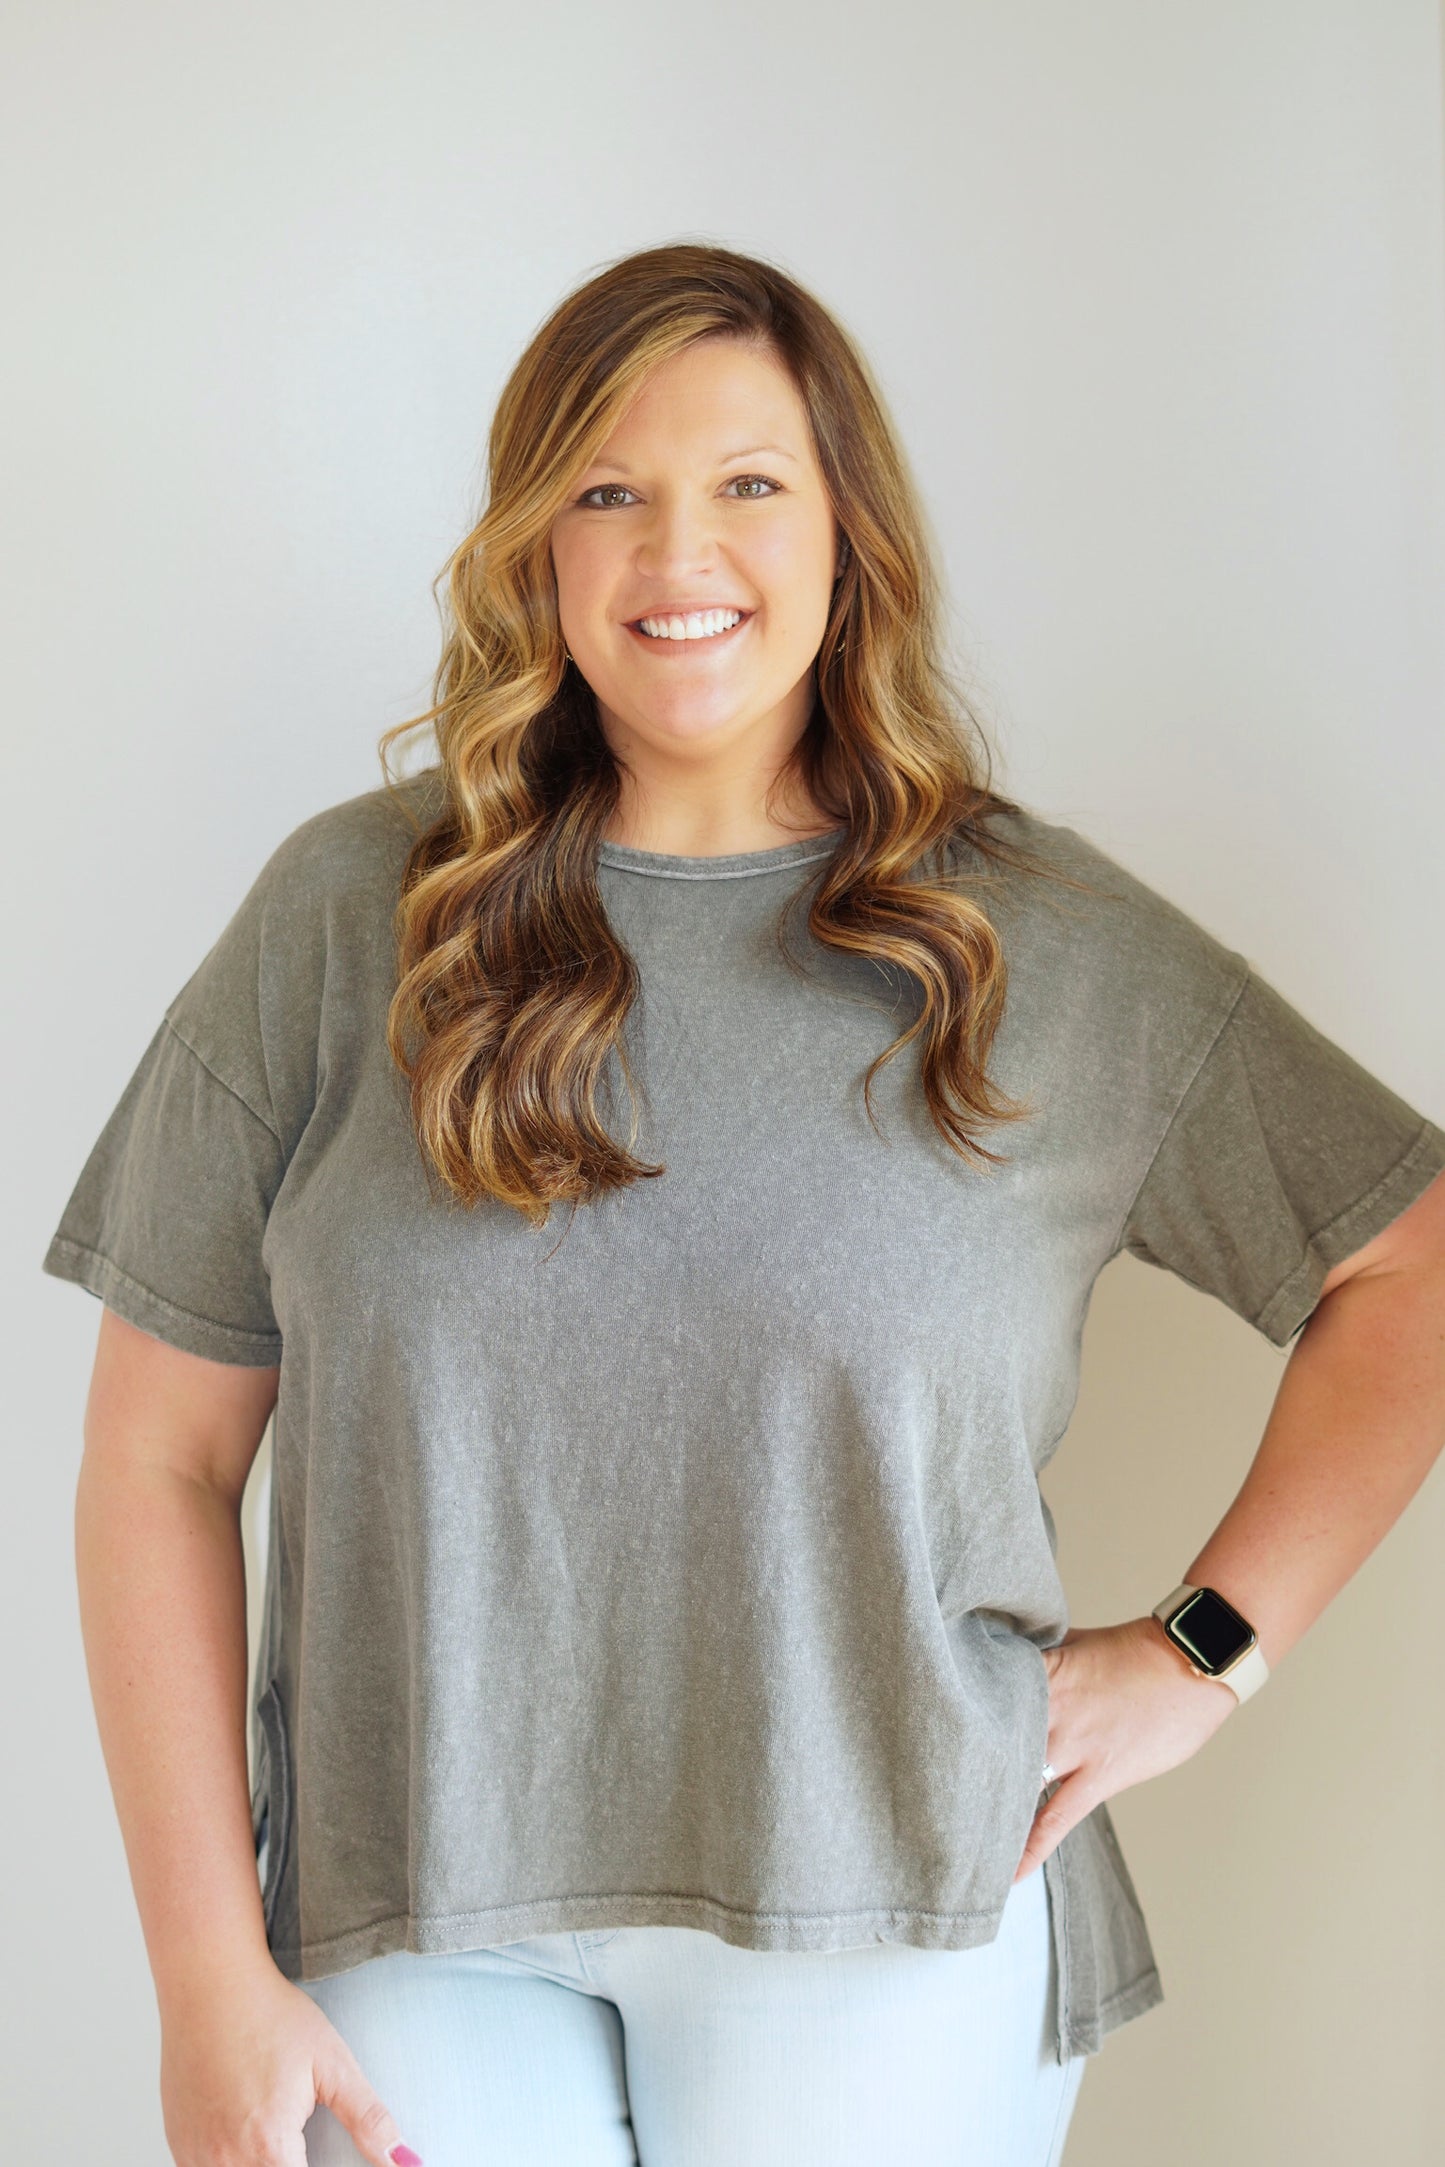 Lush Smoky Washed Top Crew Neckline Short Sleeve Longer Length in the Back Washed Grey Loose Fit 100% Cotton Care: Hand wash cold, hang to dry, do not bleach Model is wearing size 1XL